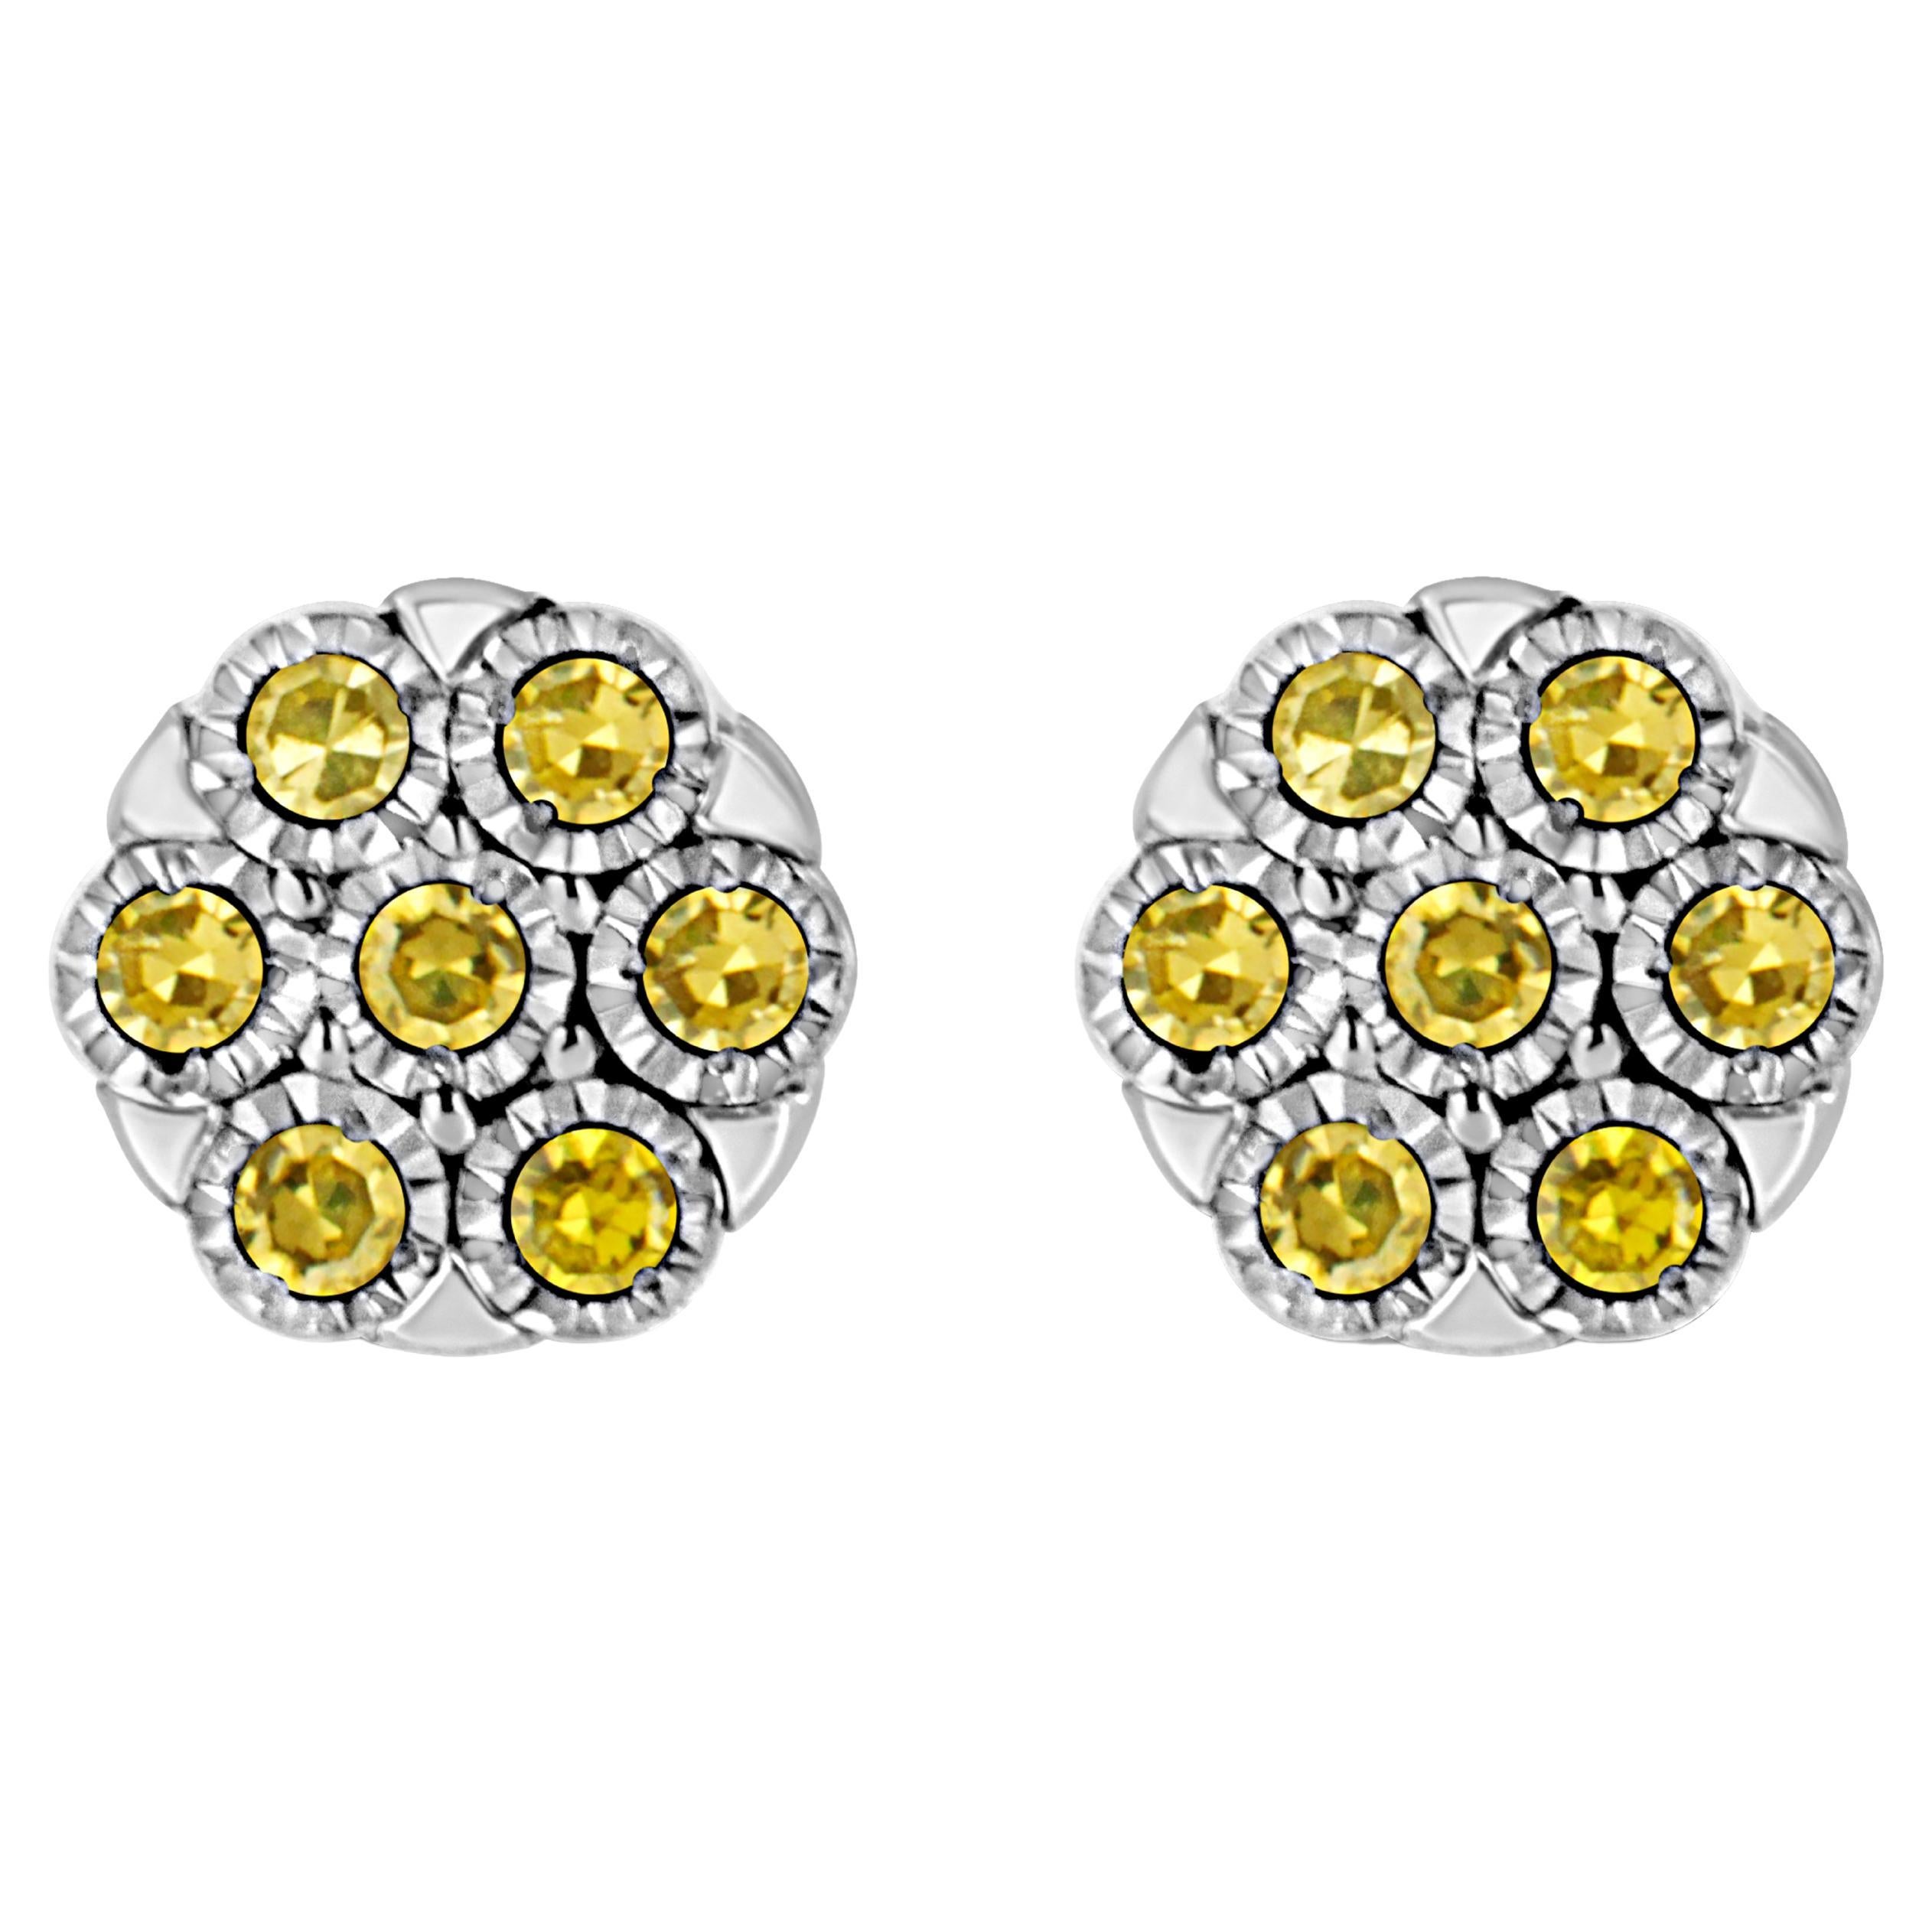 .925 Sterling Silver 1/4 Carat Yellow Color Treated Diamond Flower Earrings For Sale